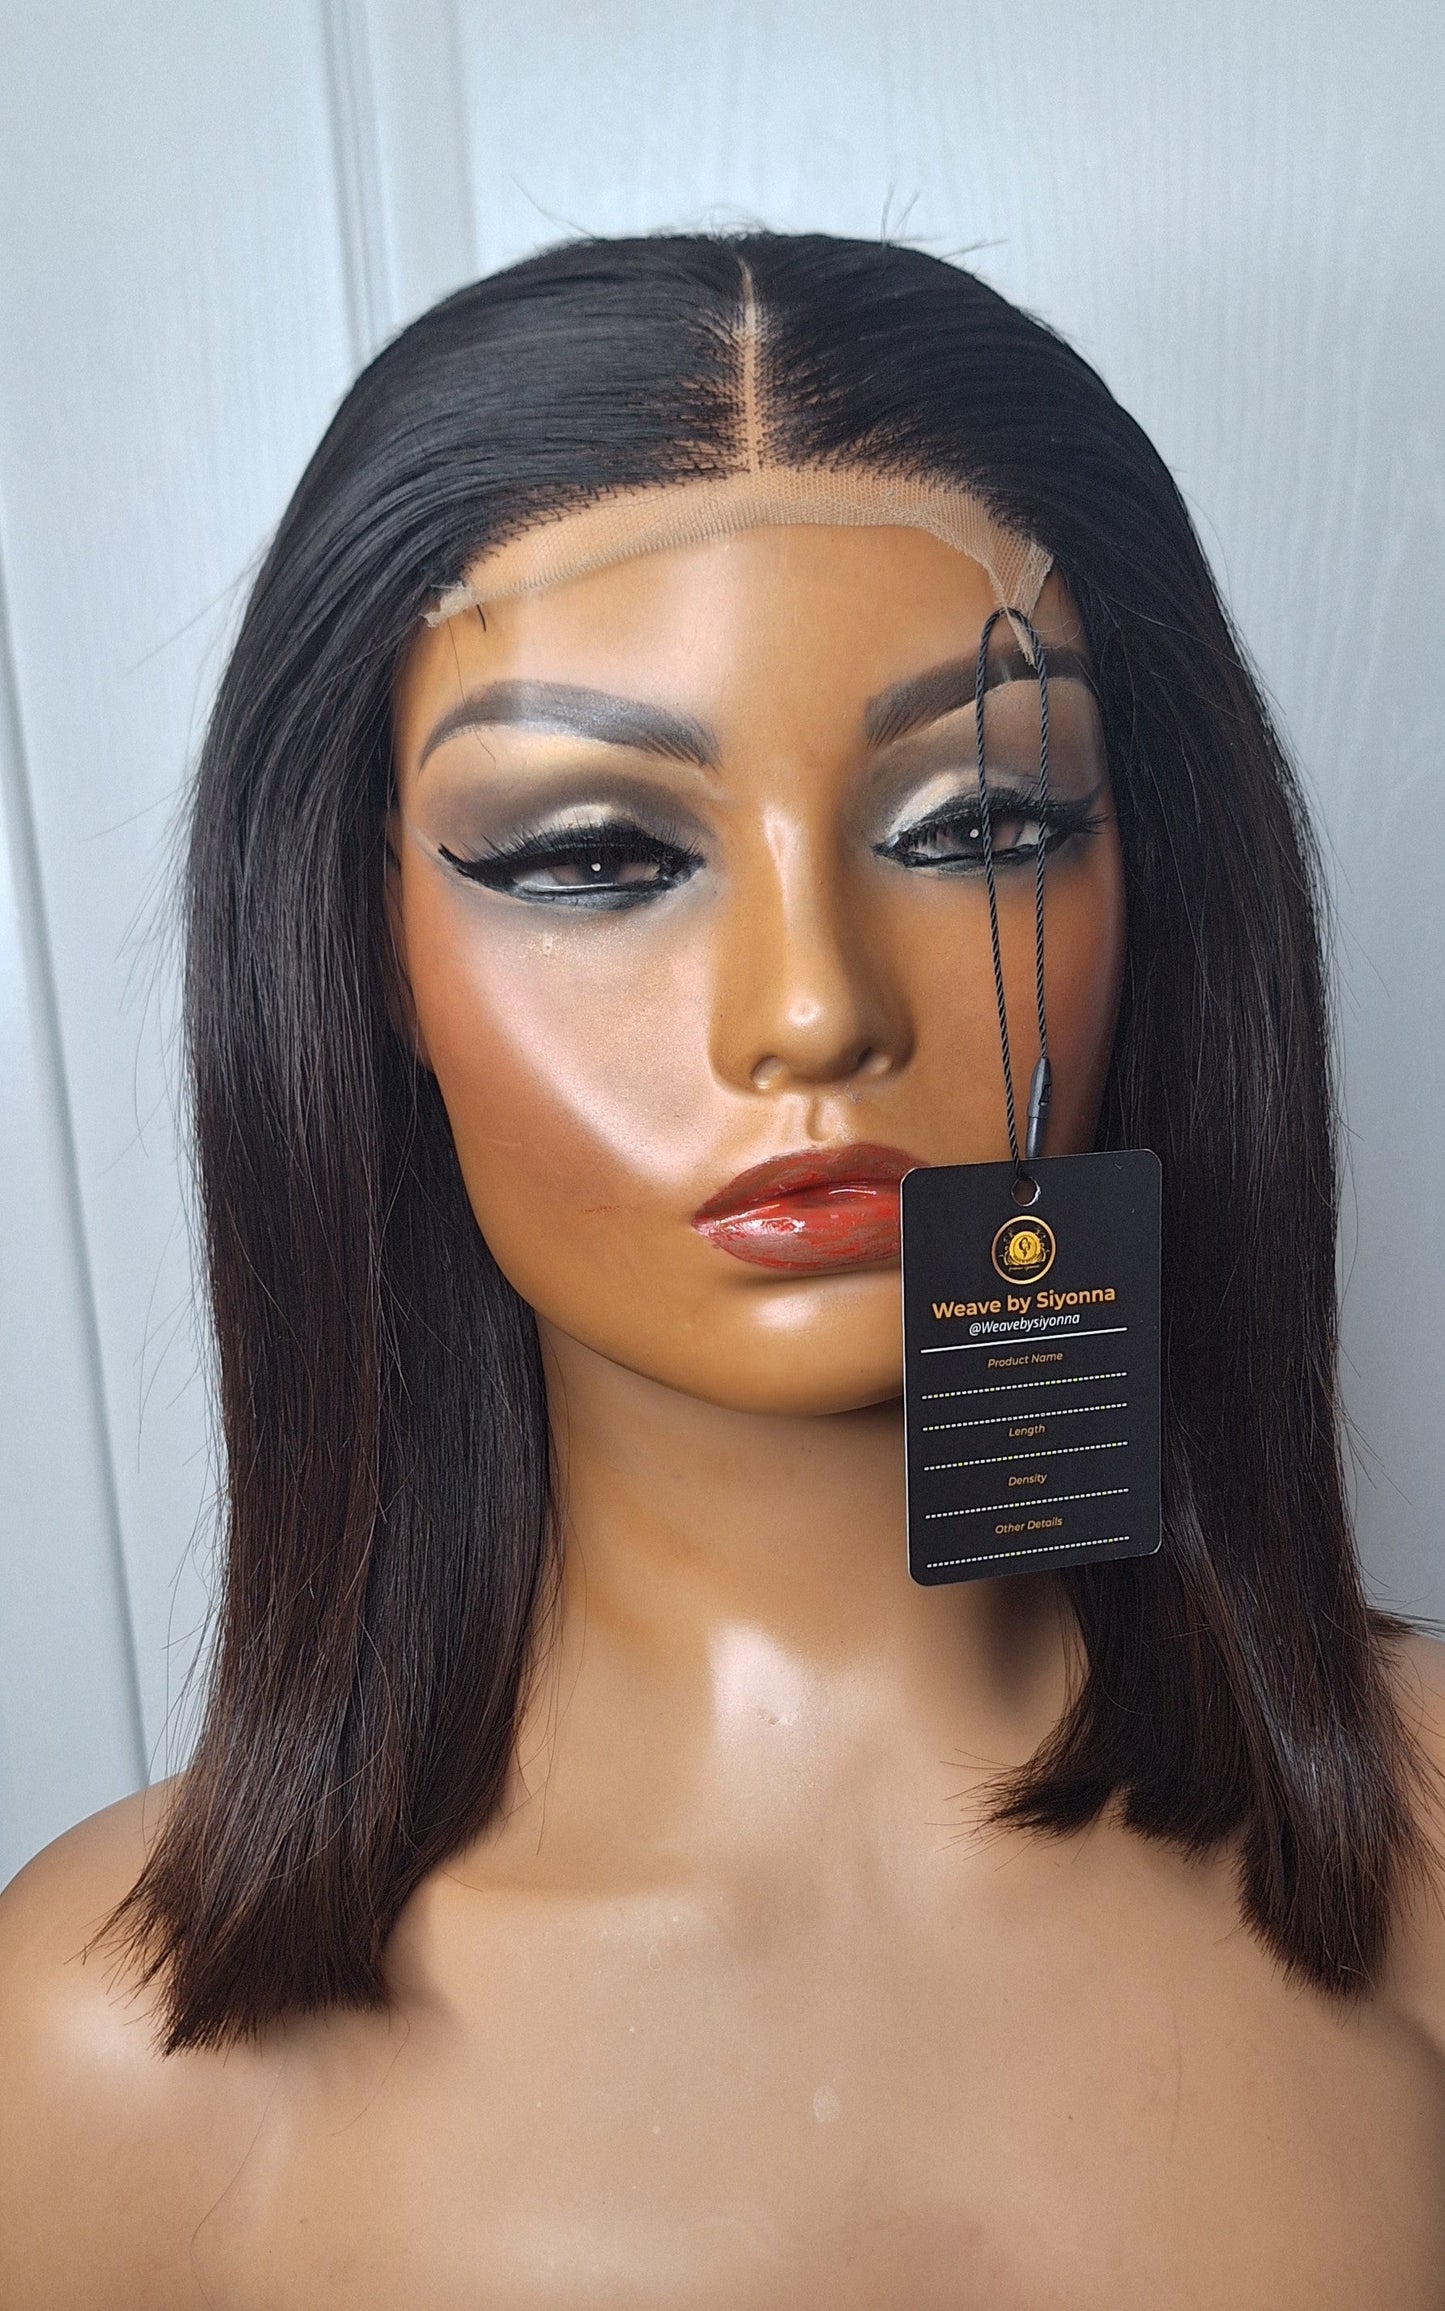 Ready to ship: Misty natural brown Blunt cut wig